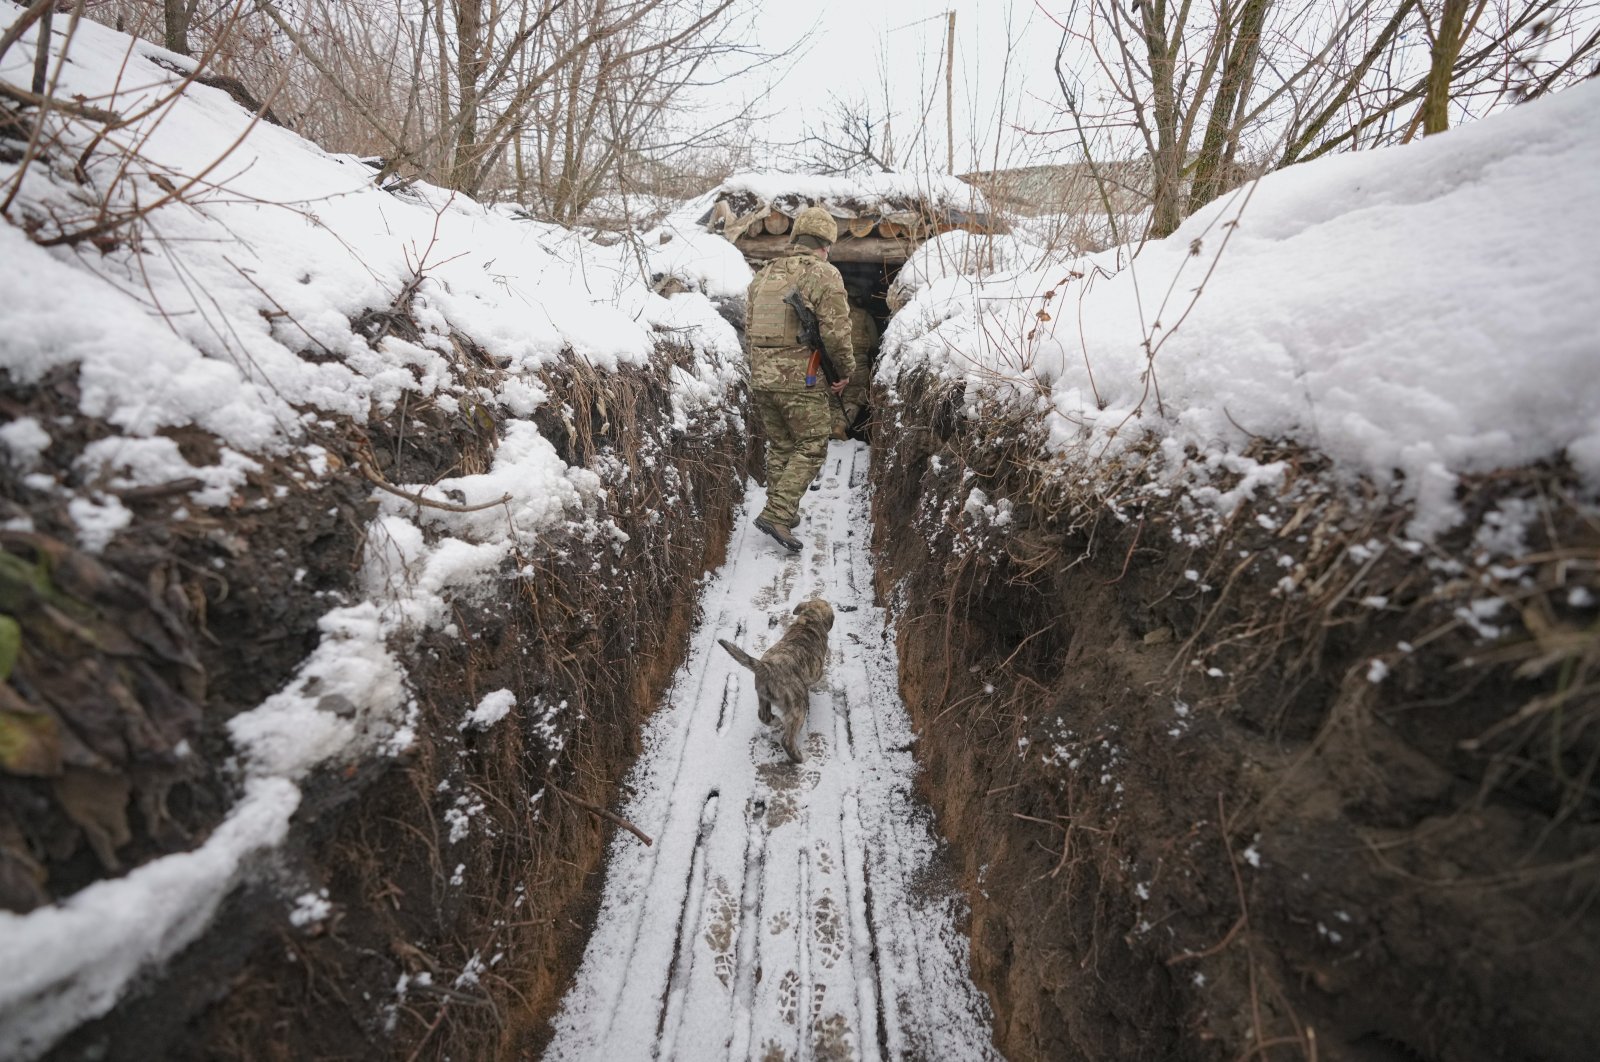 A Ukrainian soldier is followed by a puppy as he walks through a trench at a frontline position in the Luhansk region, eastern Ukraine, Feb. 1, 2022. (AP Photo)